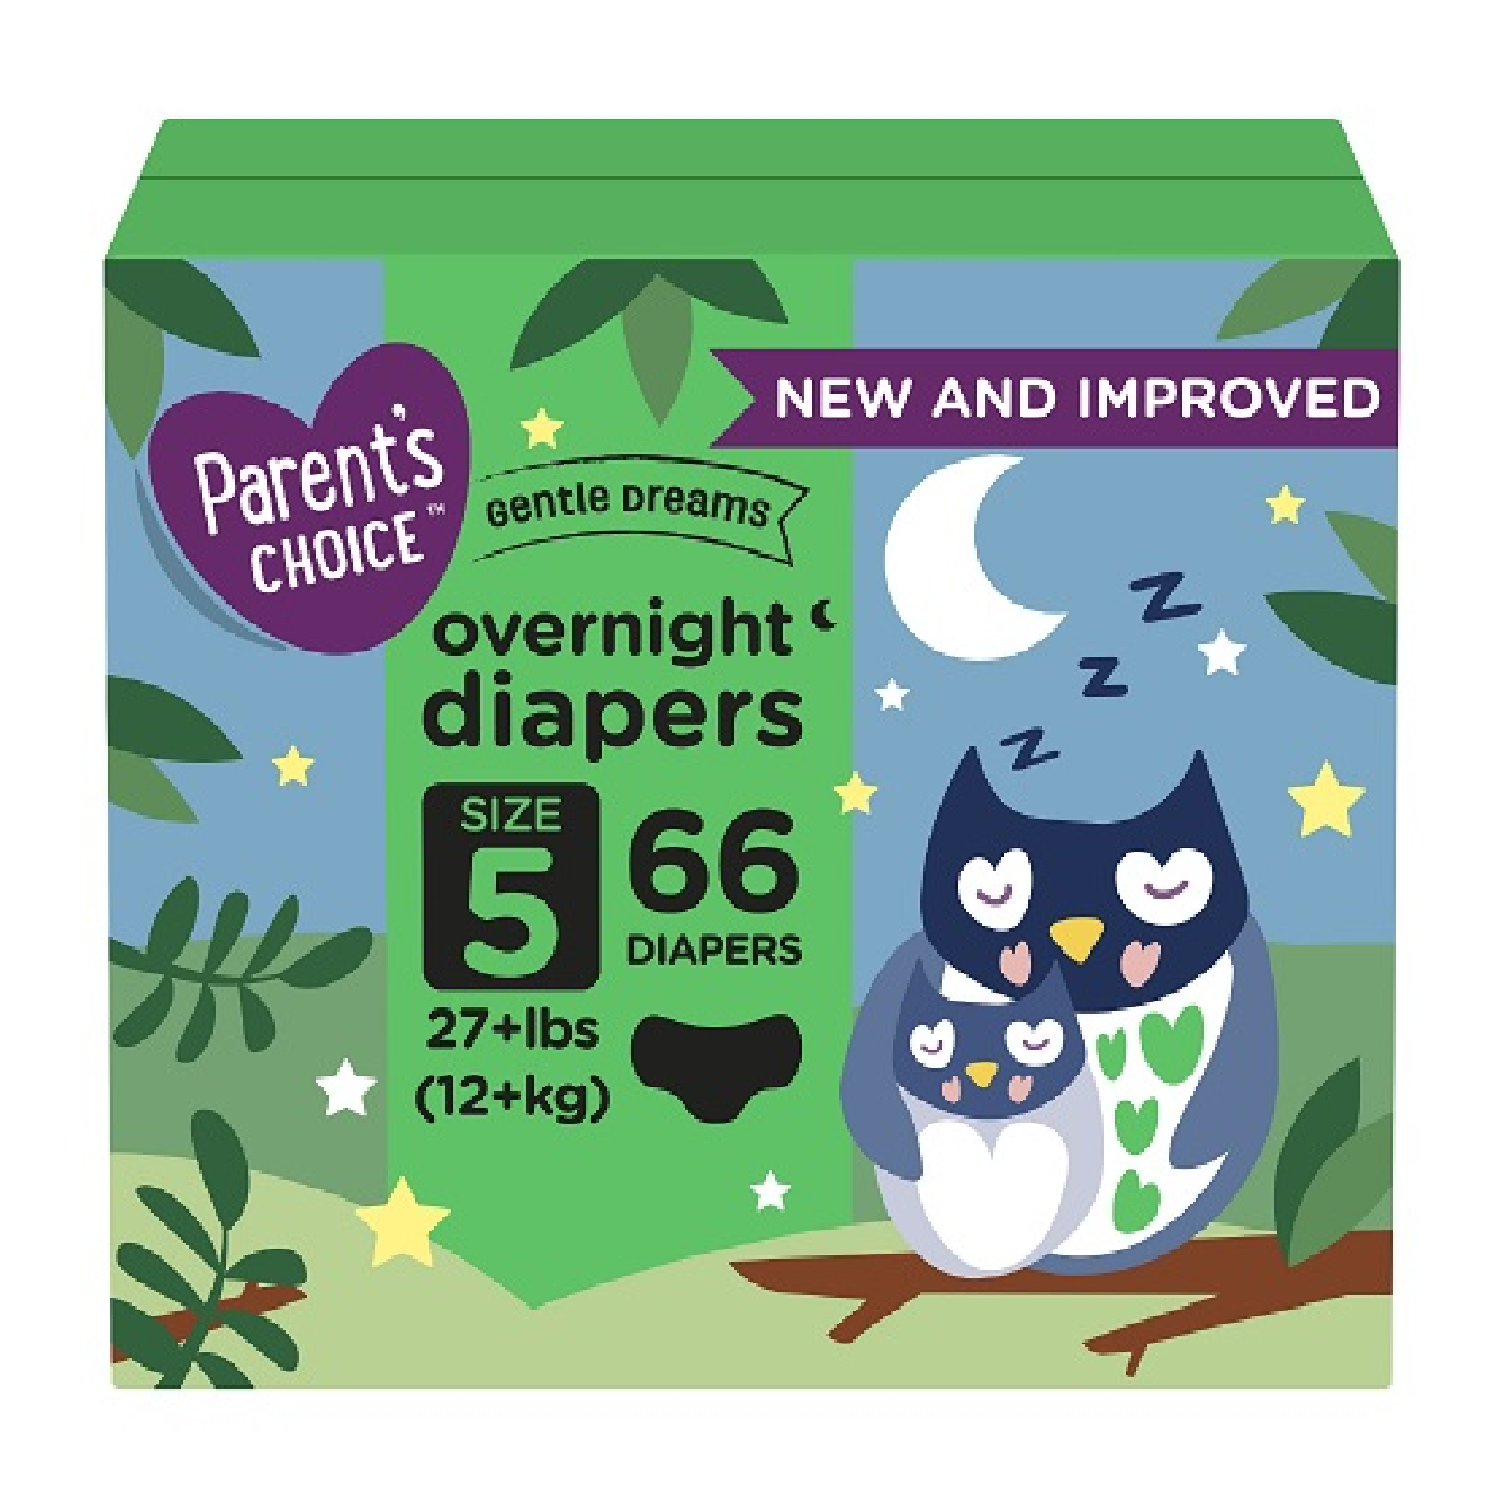 Parent's Choice Gentle Dreams Overnight Diapers, Size 5 66 Pcs - image 2 of 2